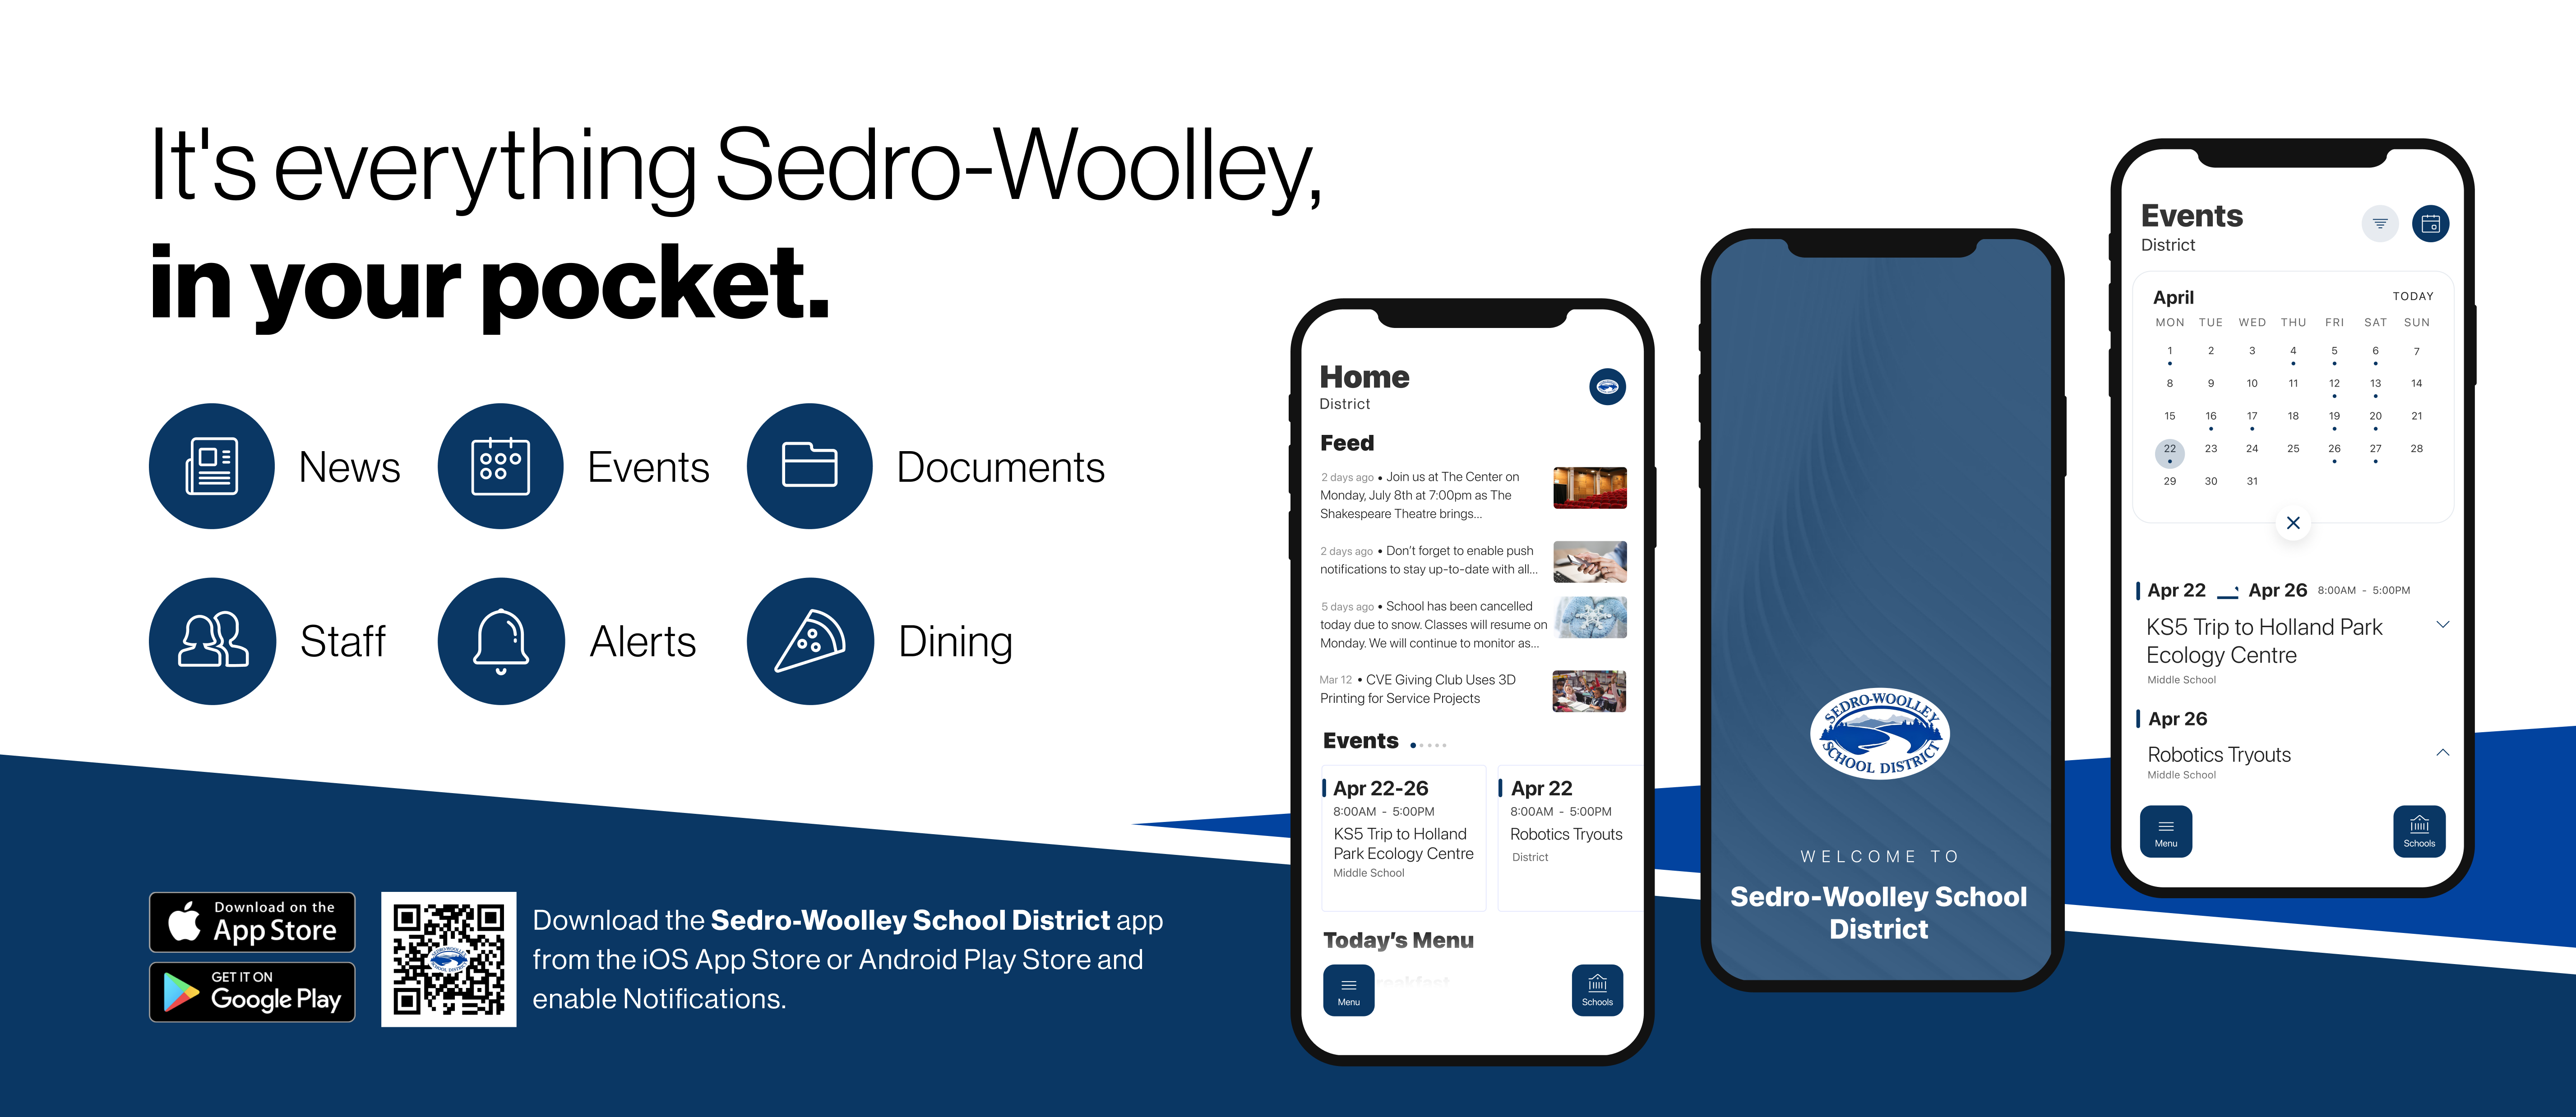 It's everything Sedro-Woolley, in your pocket.